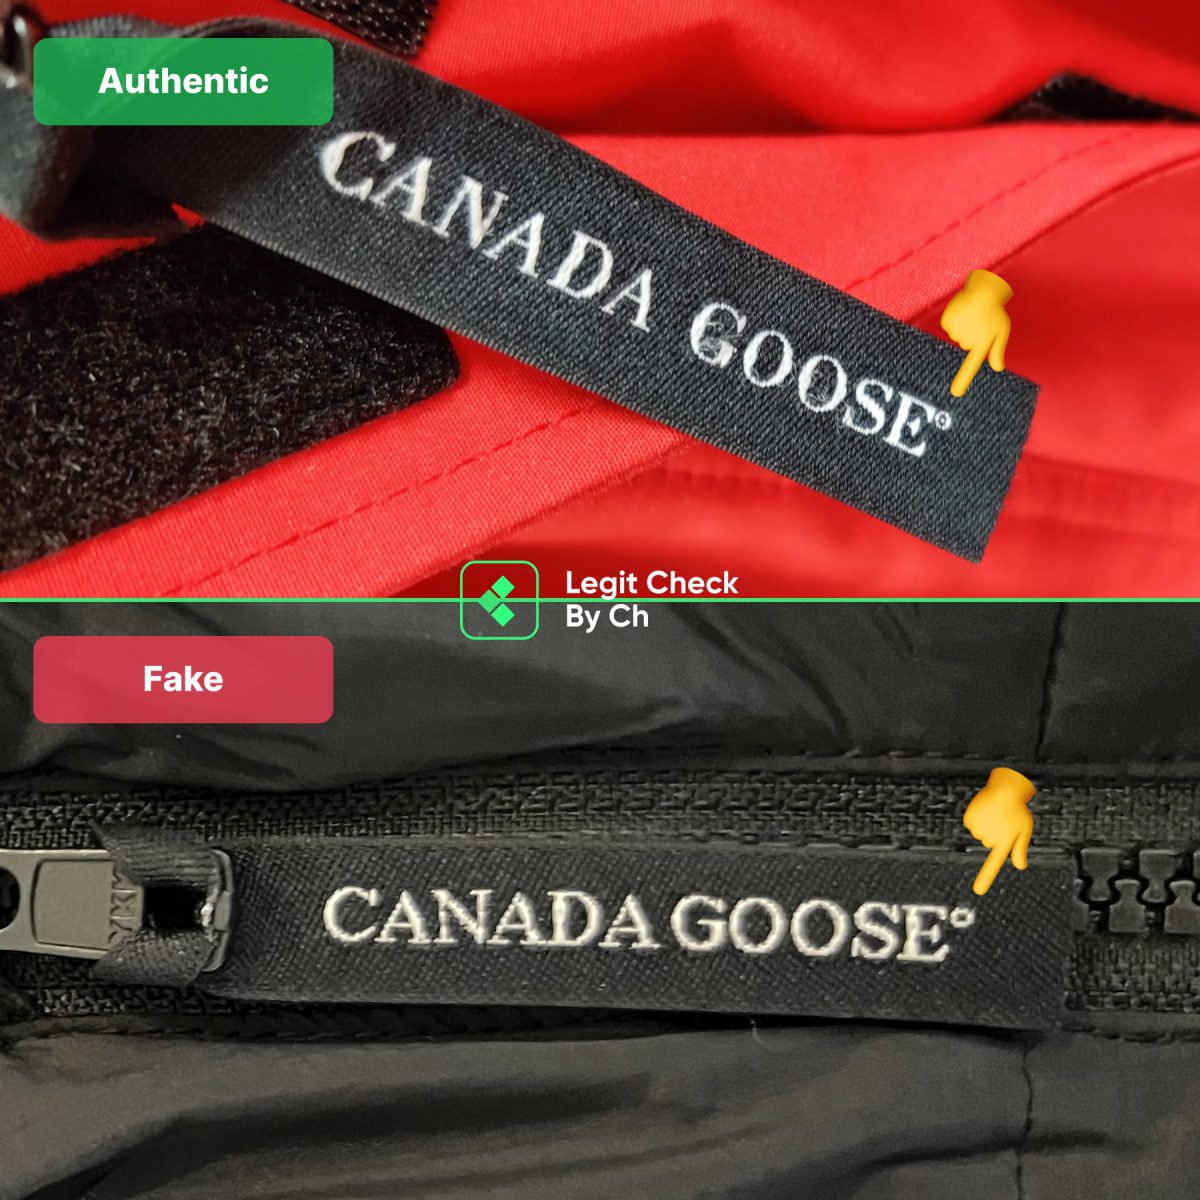 Zipper comparison of the real vs fake Canada Goose Jackets